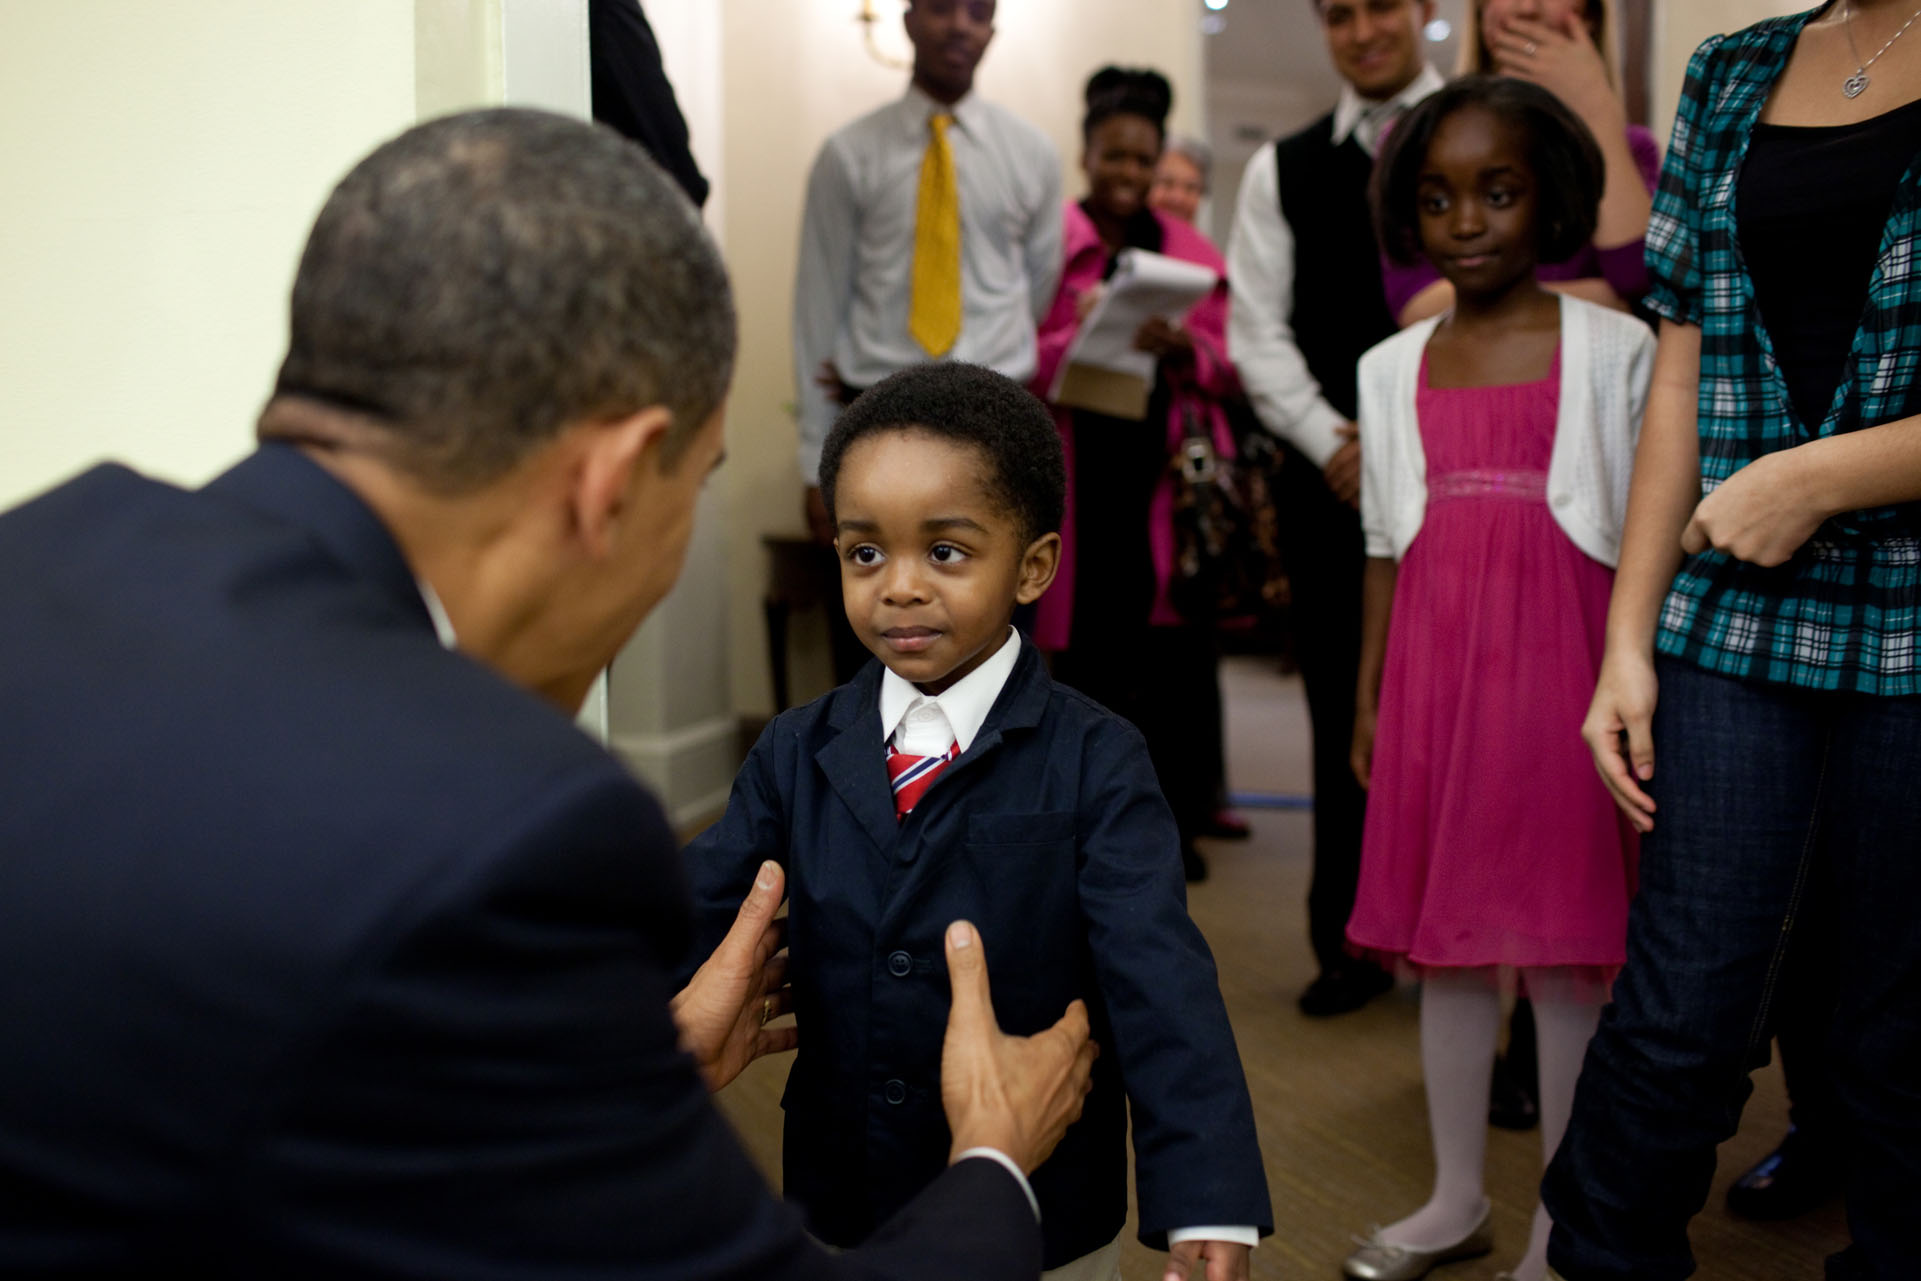 The President Greets a Young Visitor